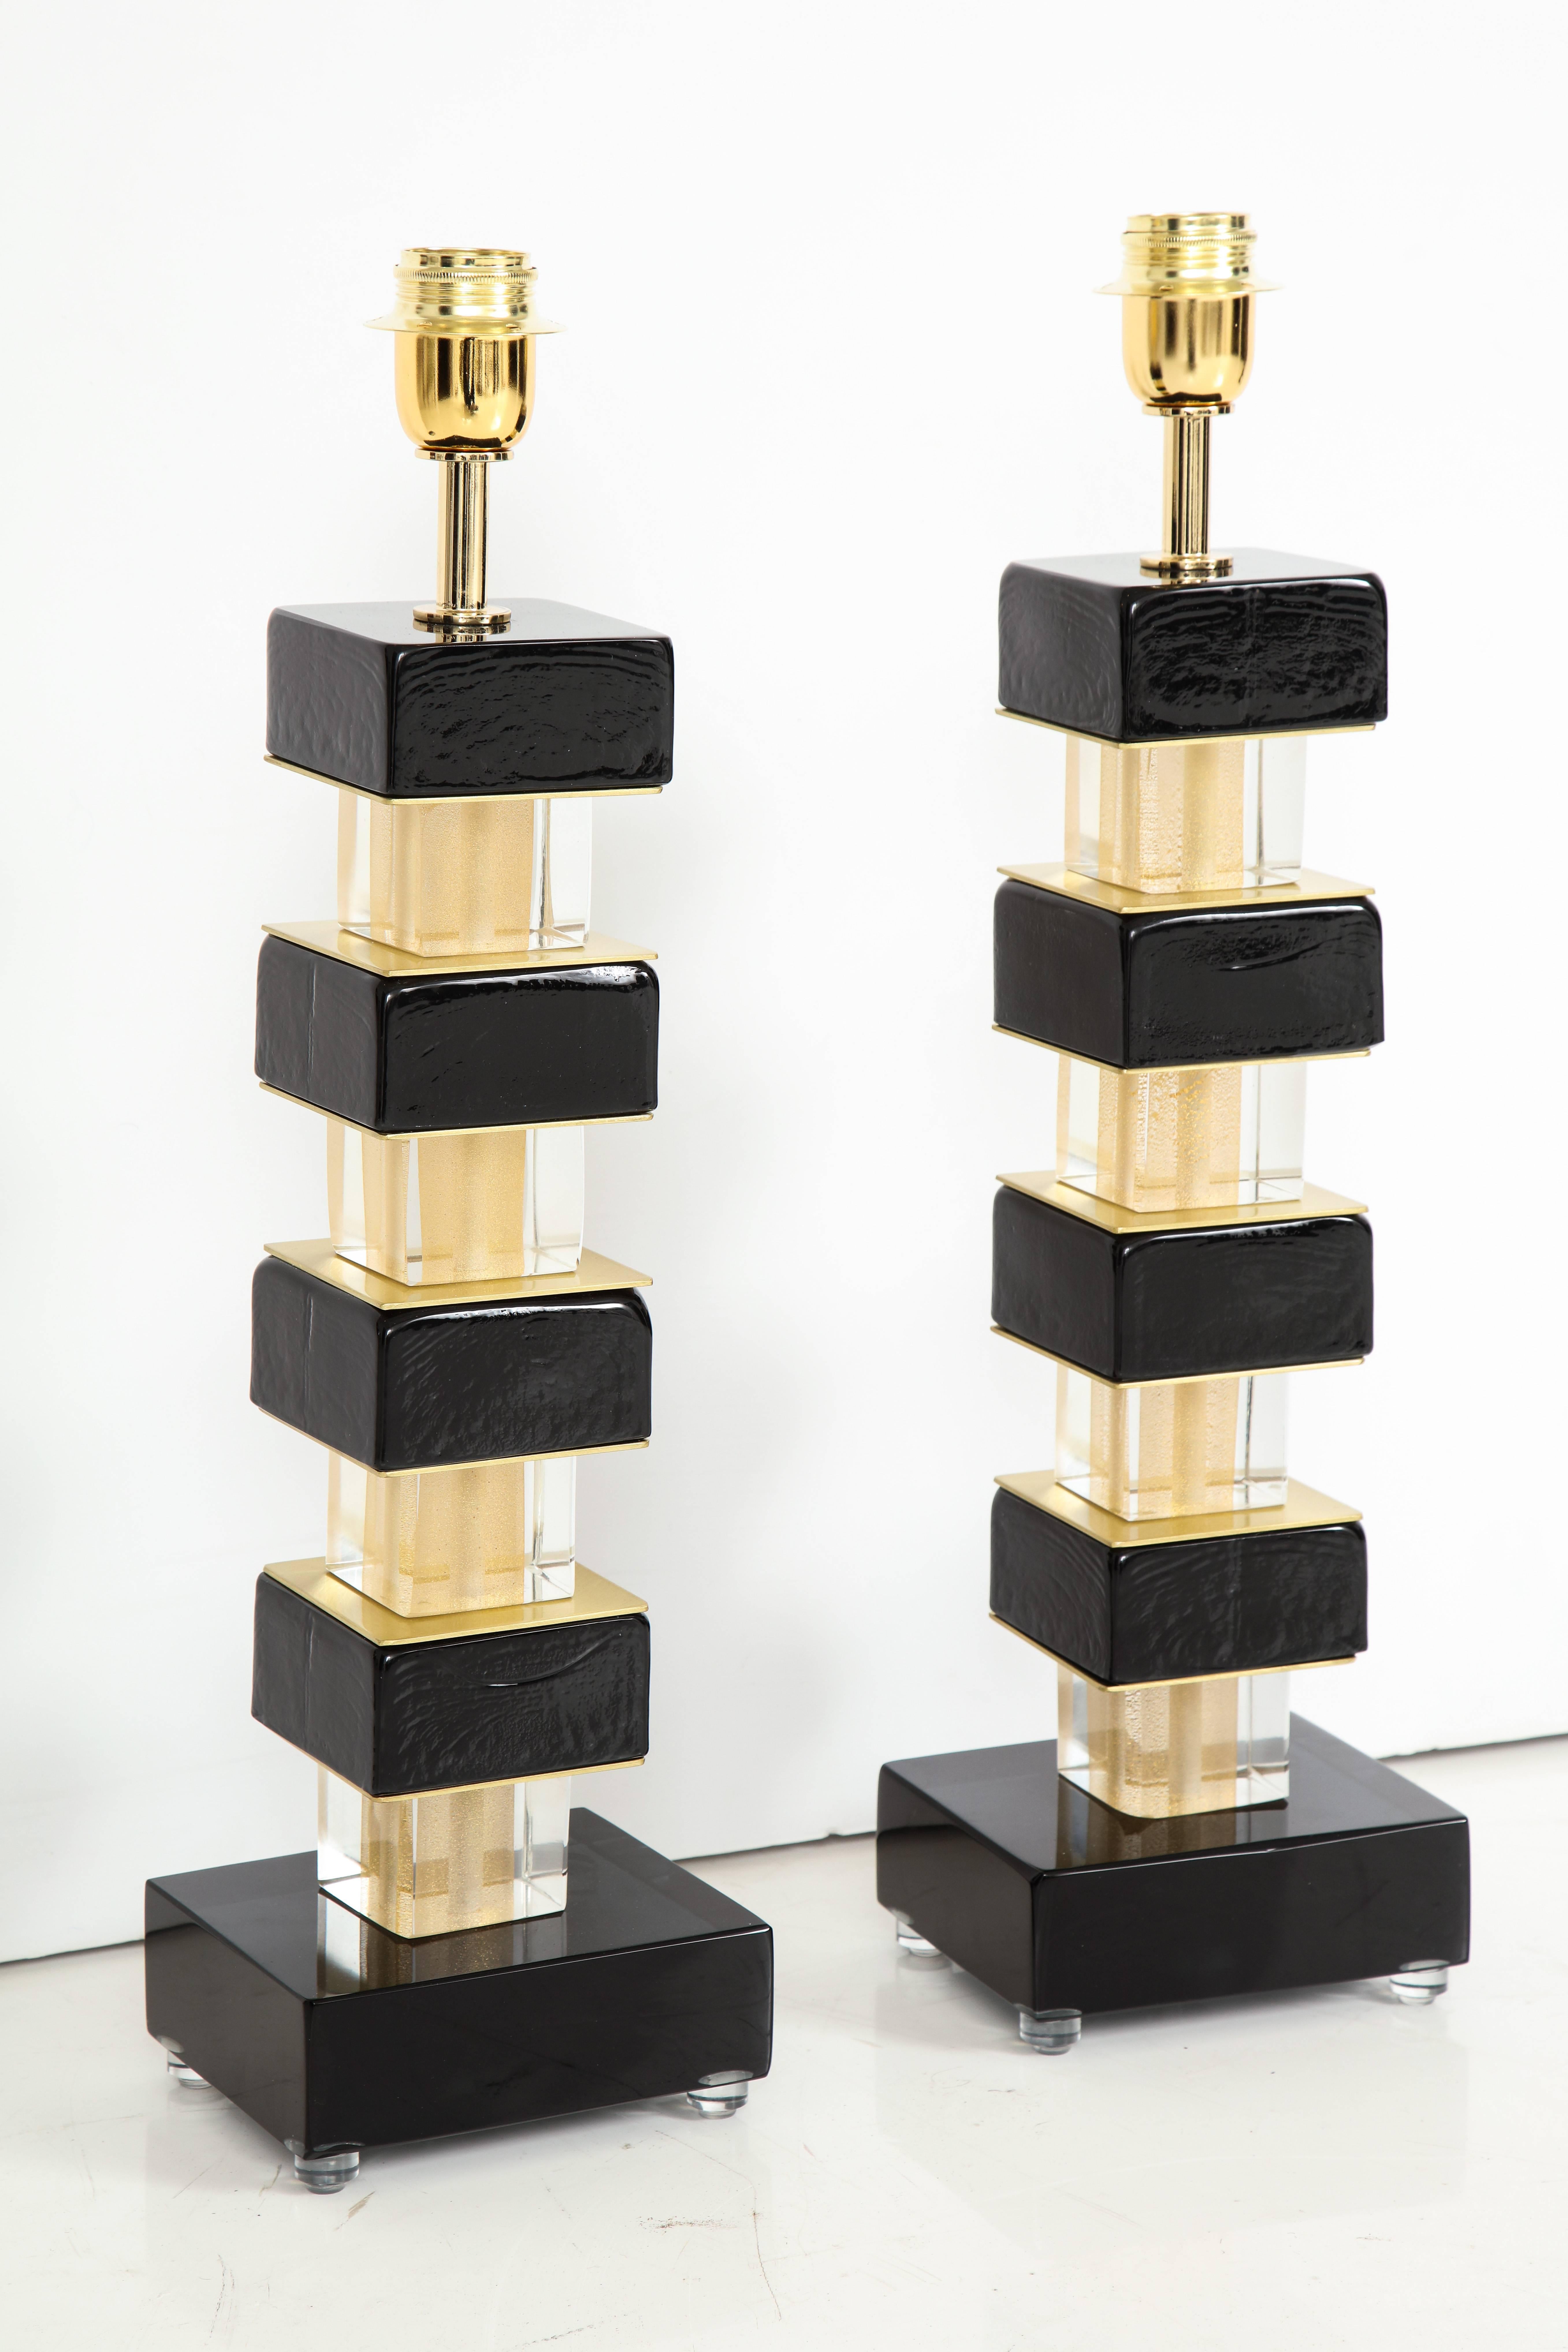 Pair of hand-casted and handcrafted black solid Murano square glass blocks and brass lamps. Individual glass blocks in alternating black and clear with 24-karat gold flecks are separated by brass plates and sit atop a solid black Murano glass block